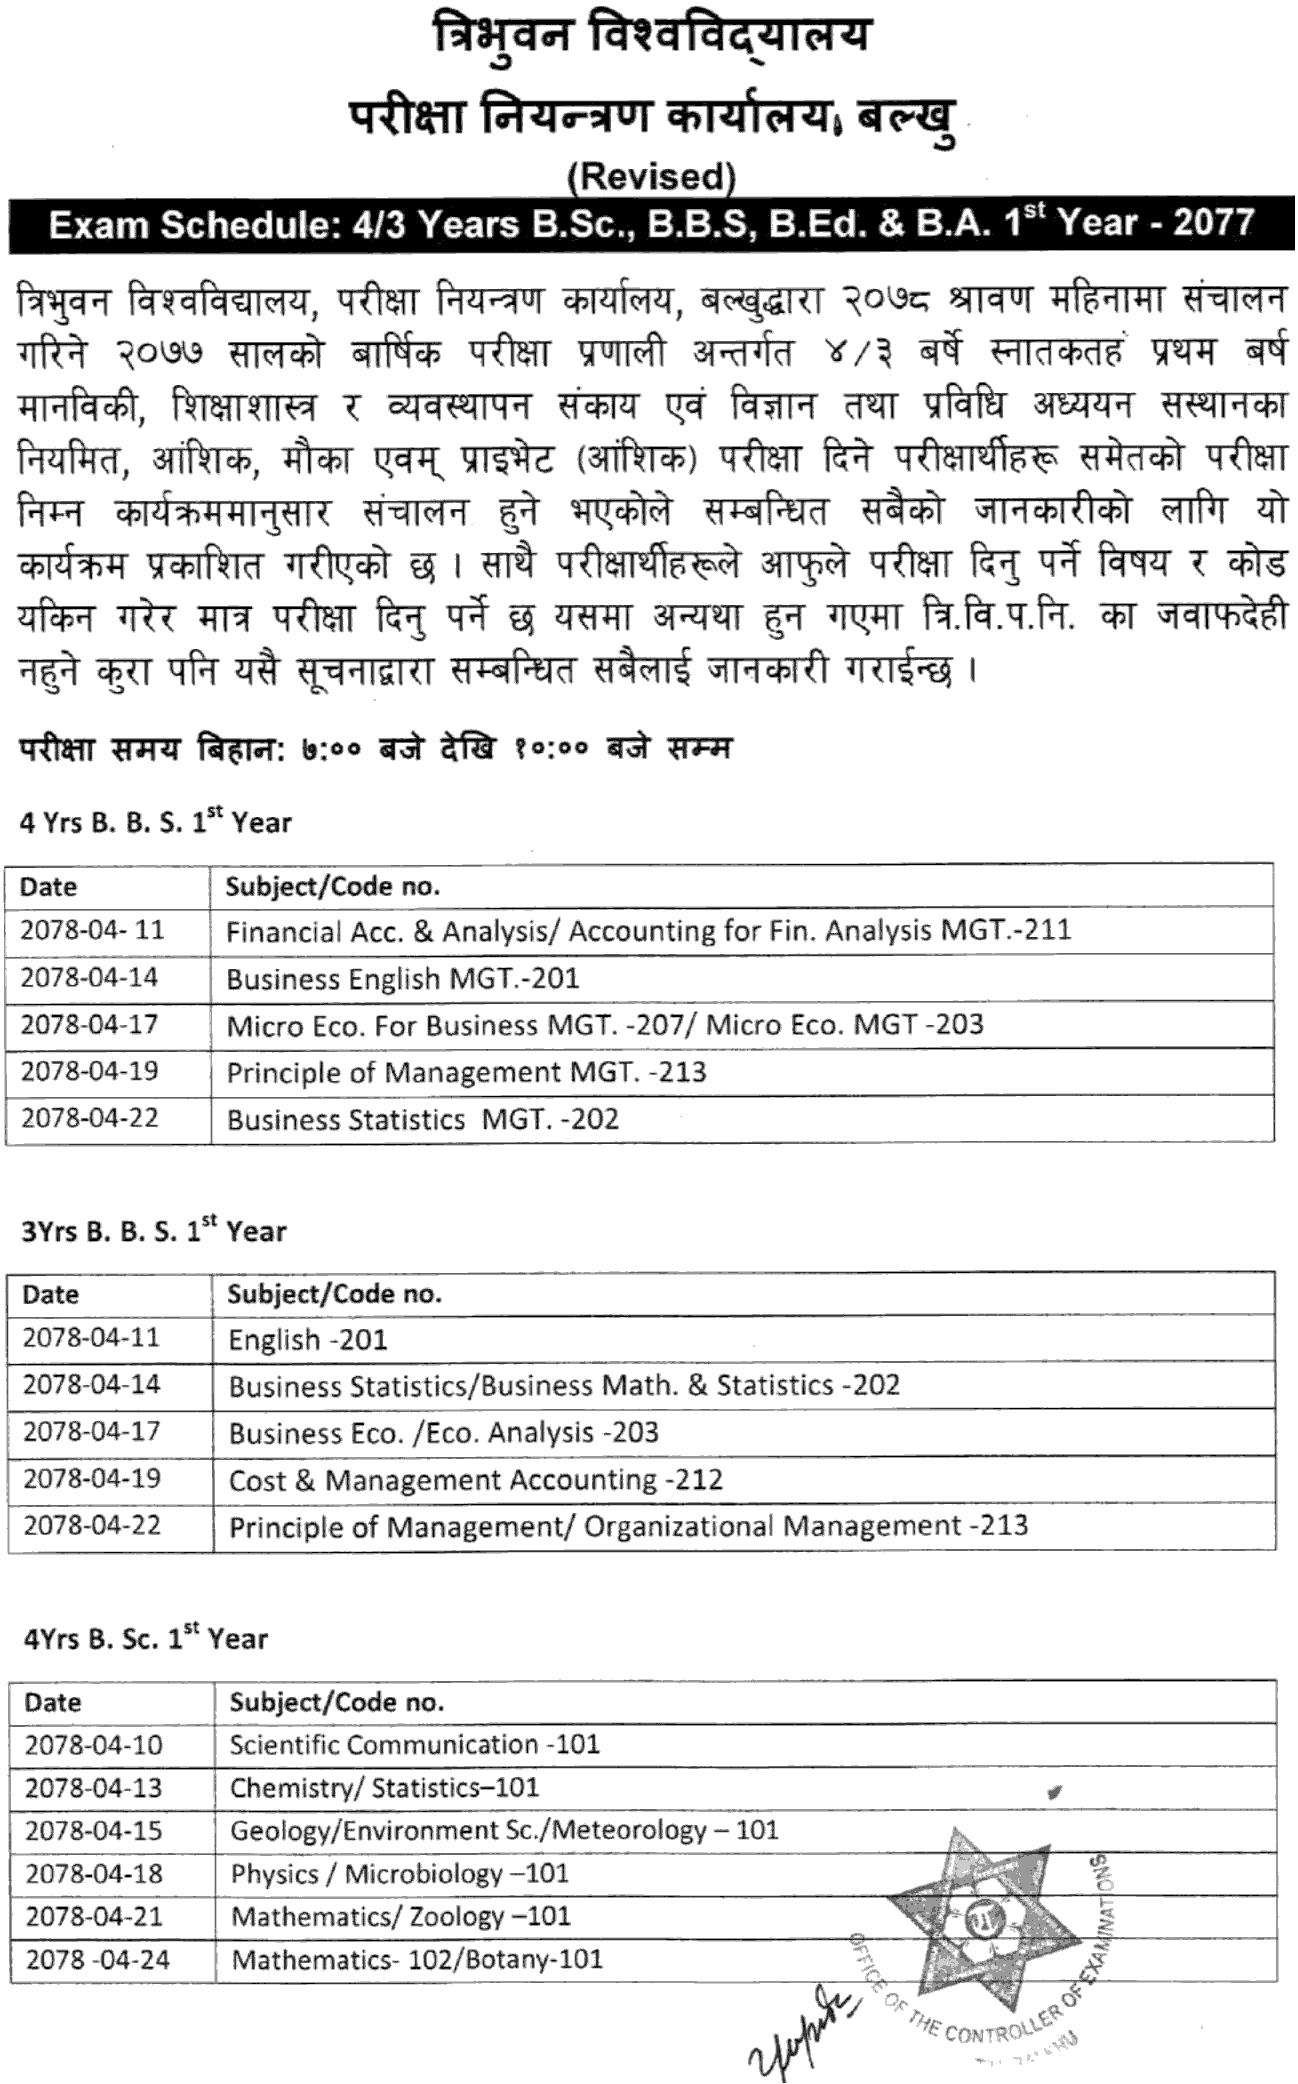 Revised Exam Routine of BBS, BA, B.Ed. and B.Sc. (3-4 Years) 1st Year Regular and Partial Exam